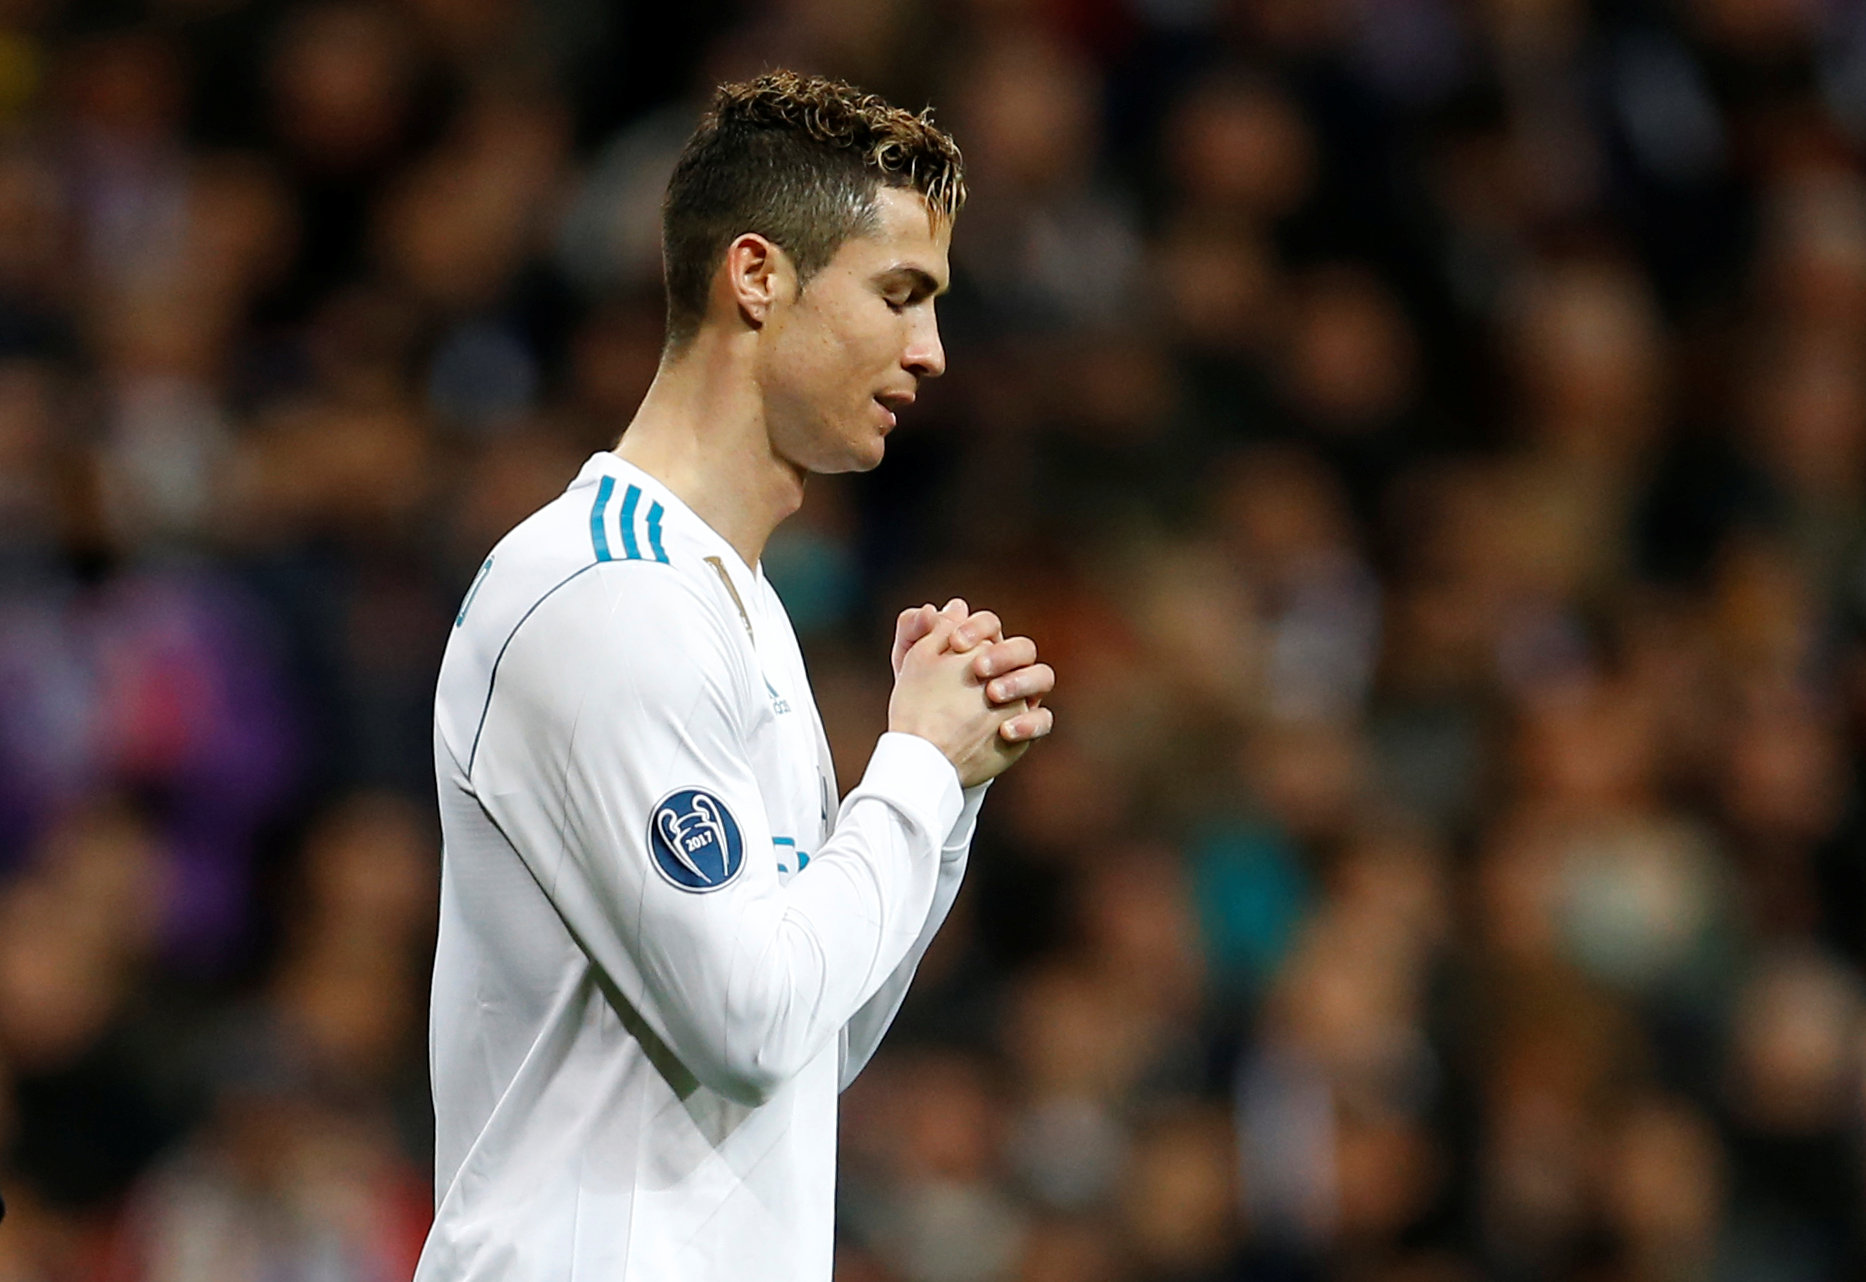 Football: Real's Ronaldo rested for Leganes game